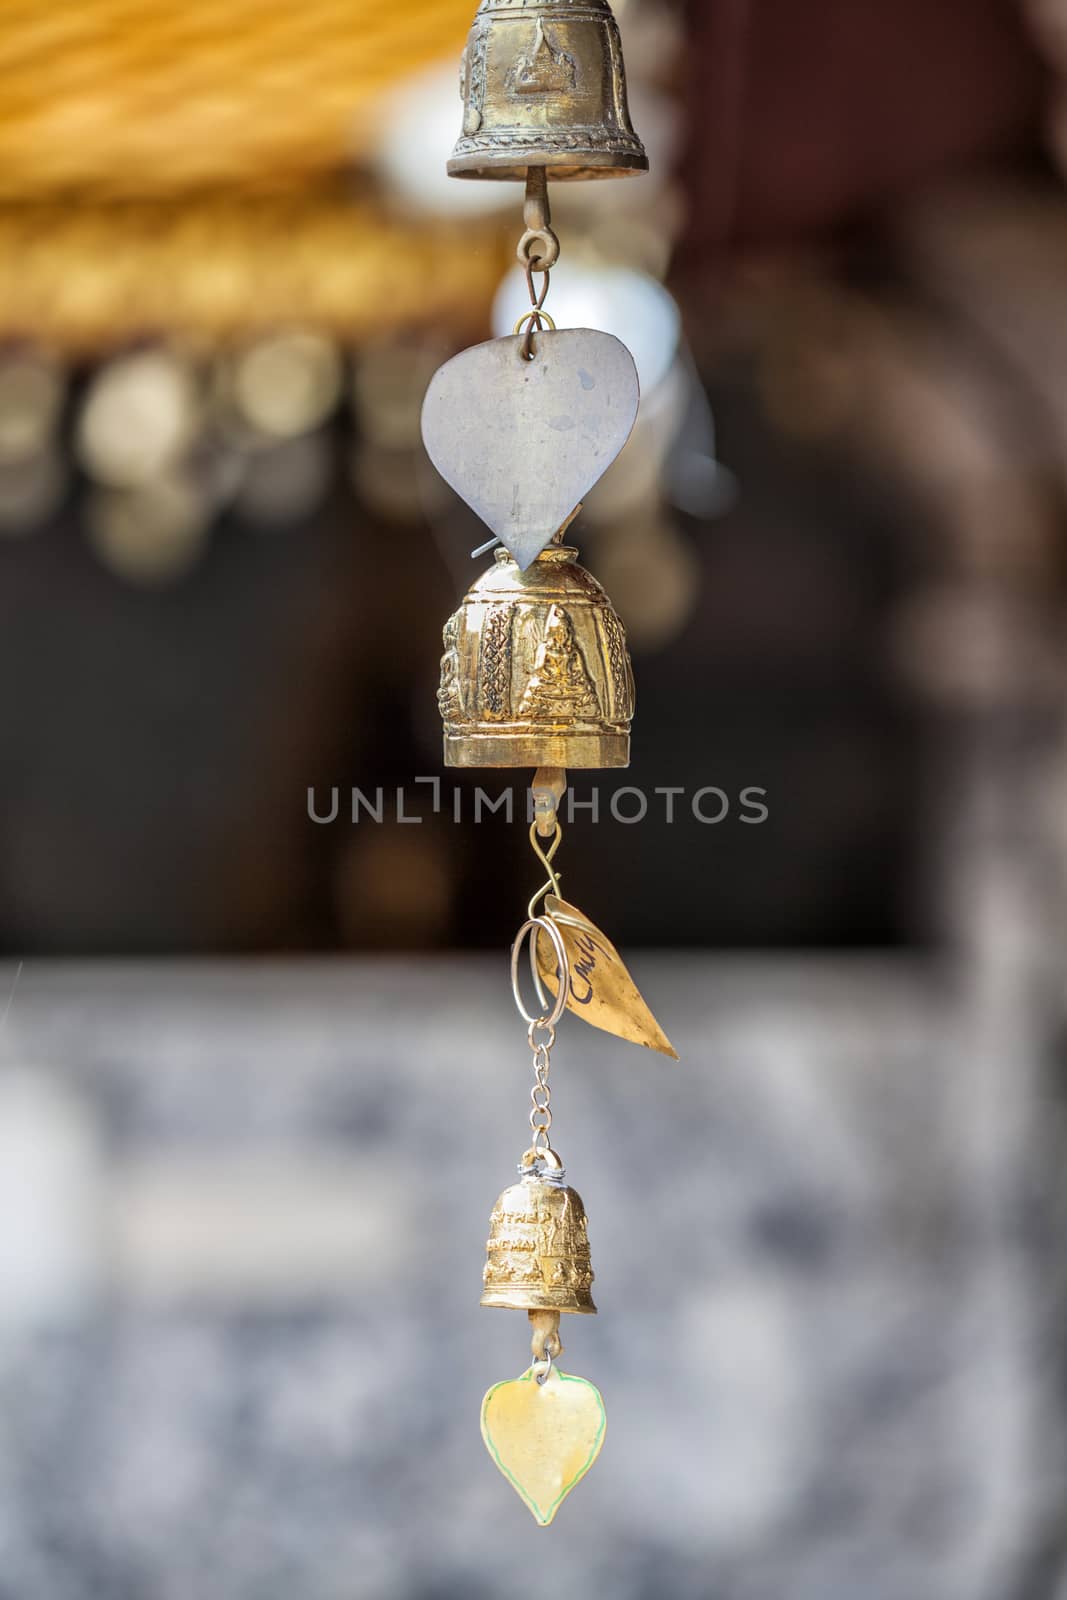 Bell in the Buddhist temple, Chiang Mai, Thailand by Tjeerdkruse